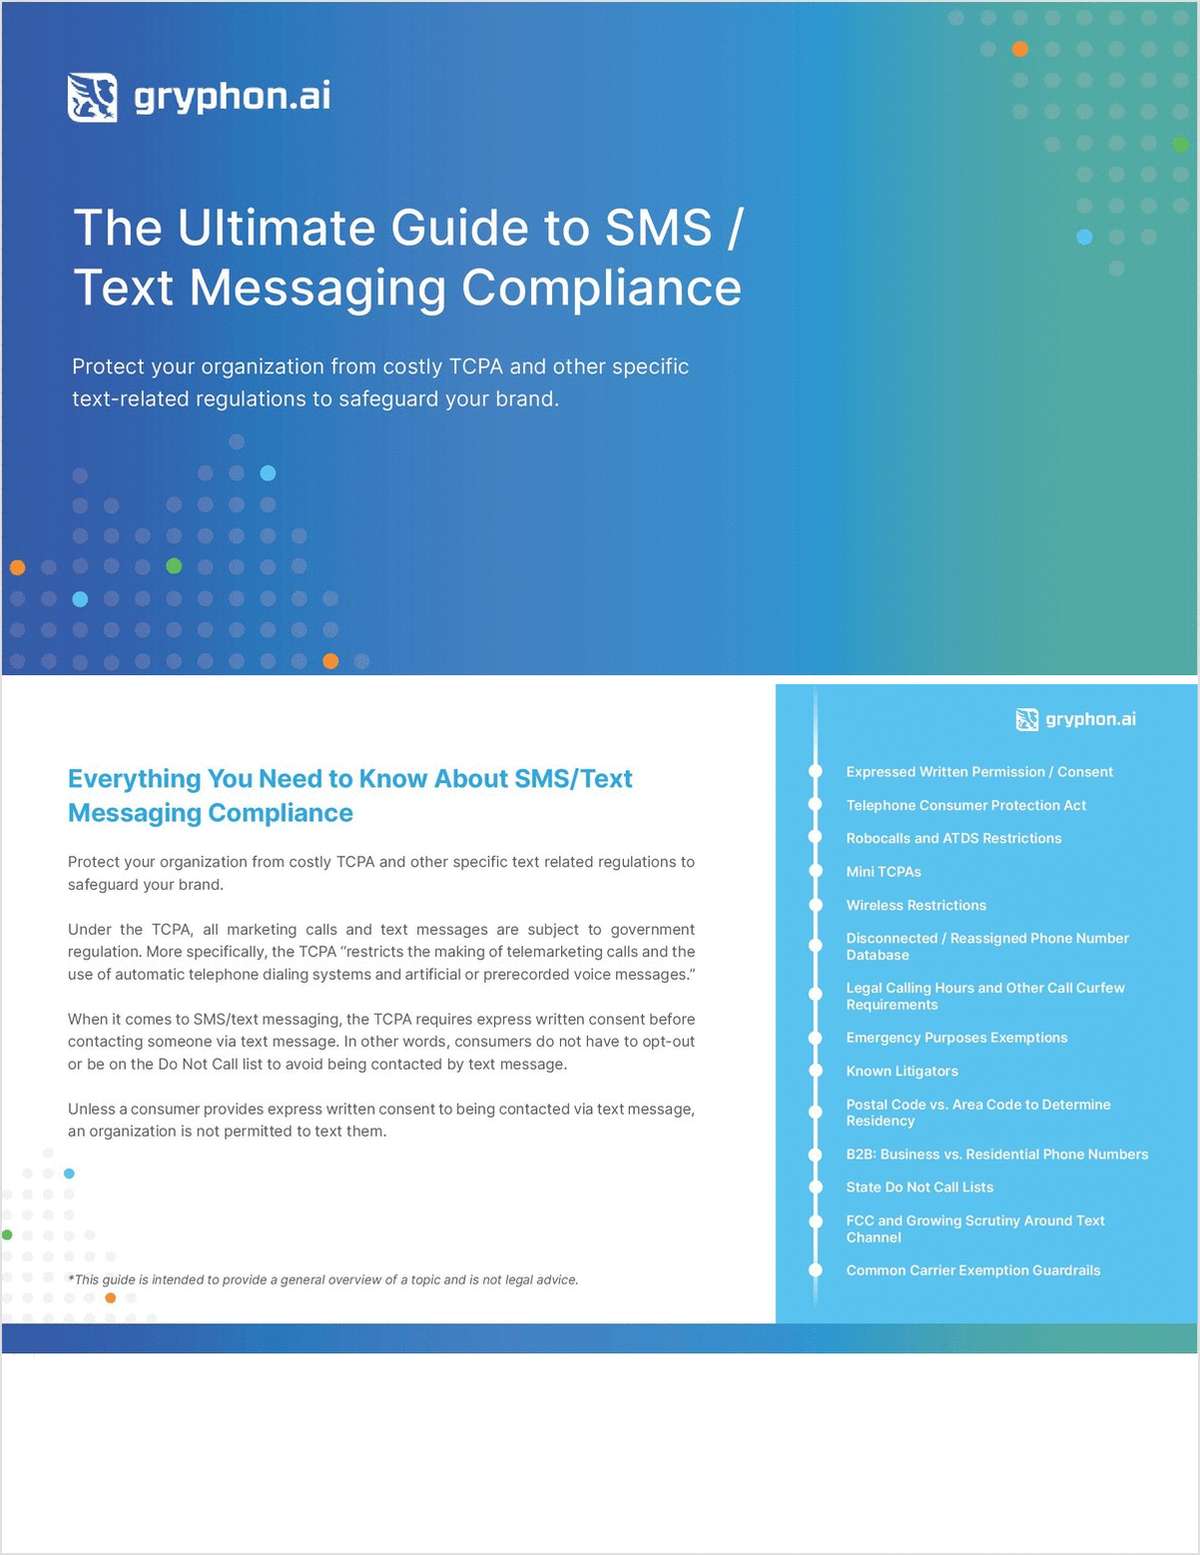 The Ultimate Guide to SMS/Text Messaging Compliance